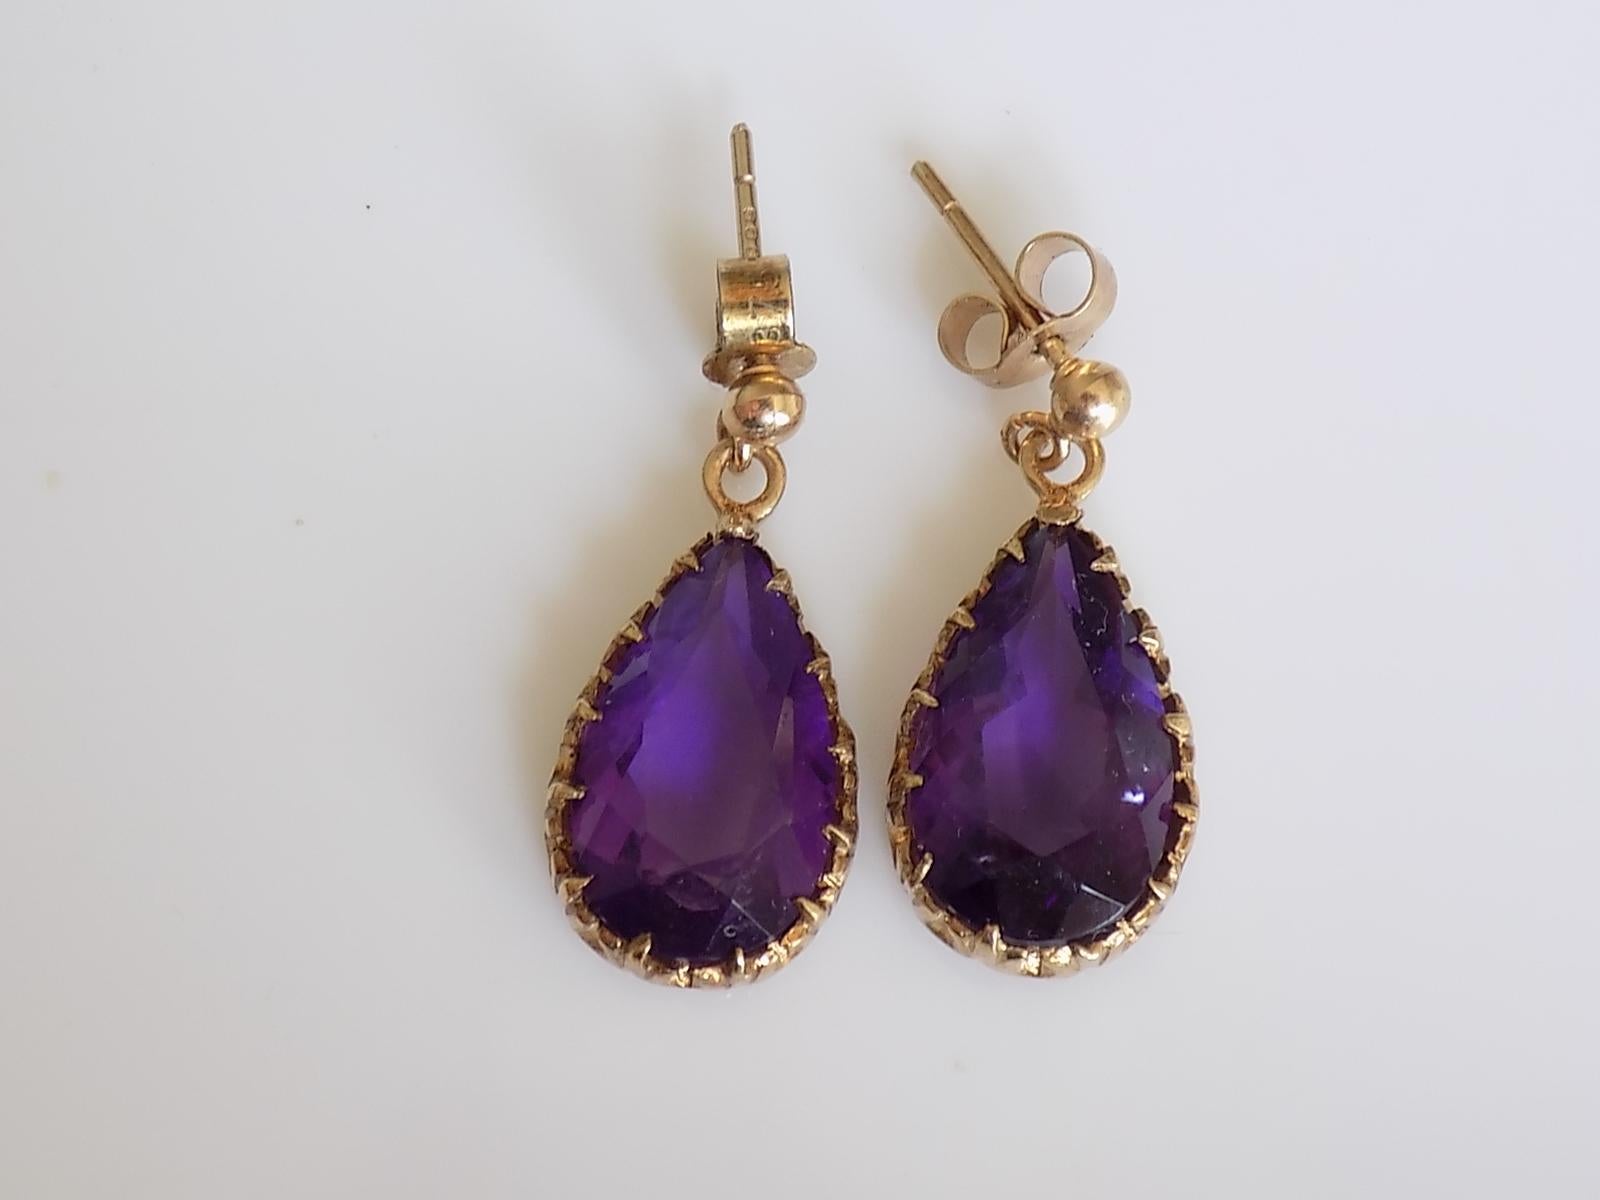 A Lovely Vintage 9 Carat Gold and Amethyst tear drop earrings. The stones in a beautiful crown style settings. English origin.
Drop including tops 23mm, width 10mm.
Weight 4.8gr.
Full London hallmark for 9 Carat gold and dated 1978.
The earrings in